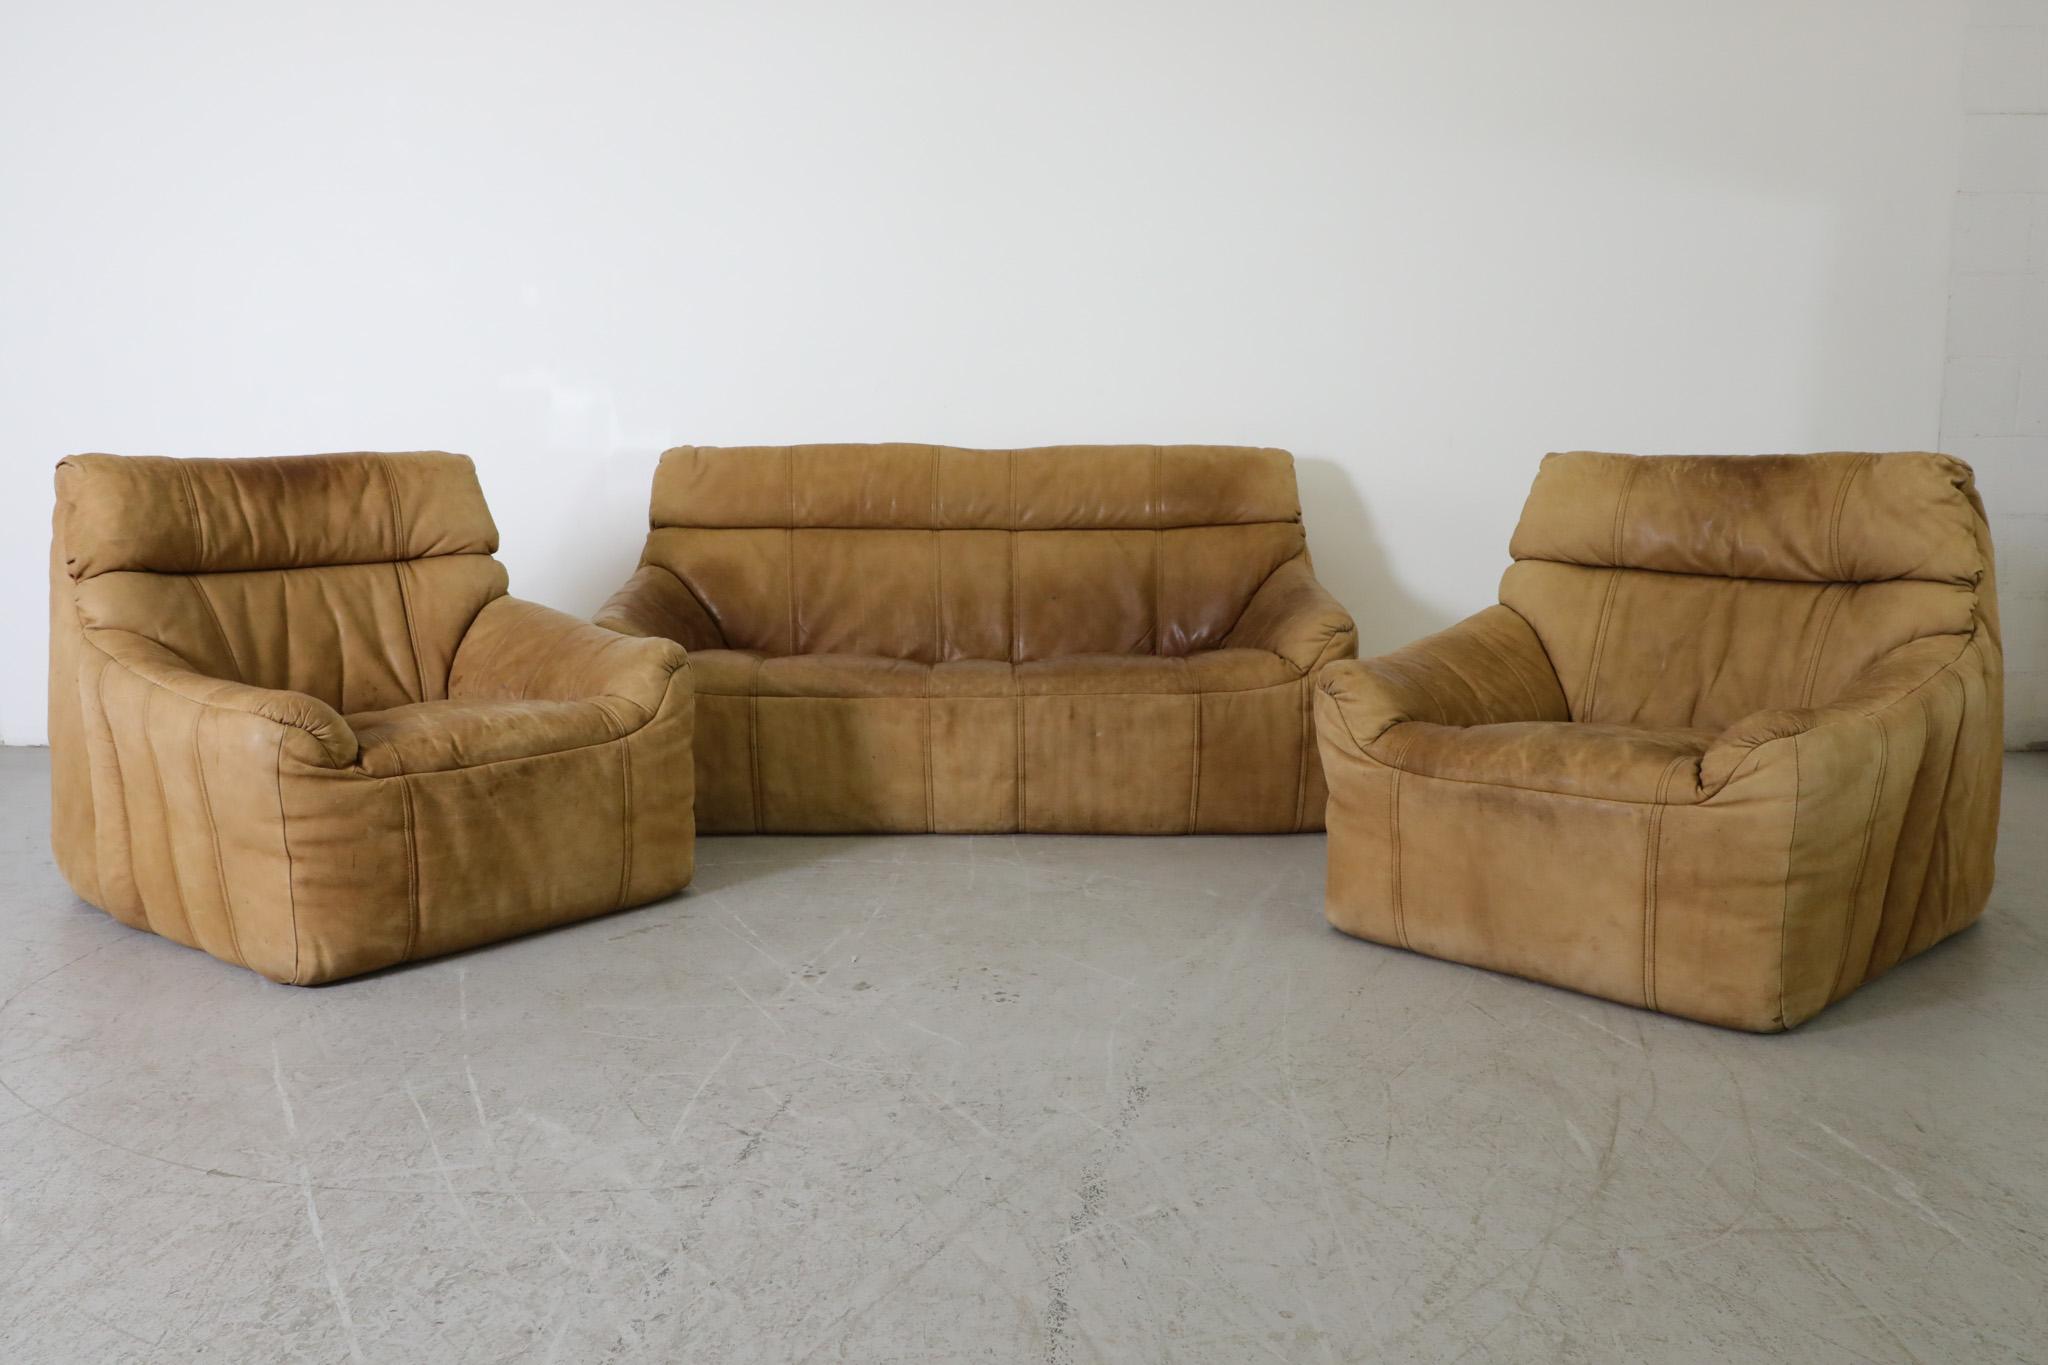 Pair of Mid-Century, nubuck leather, lounge chairs by German furniture manufacturer Rolf Benz. Designed and made in the 1970s. A handsome chair set with inviting soft form frames covered with durable, leather upholstery. Has beautiful, well-loved